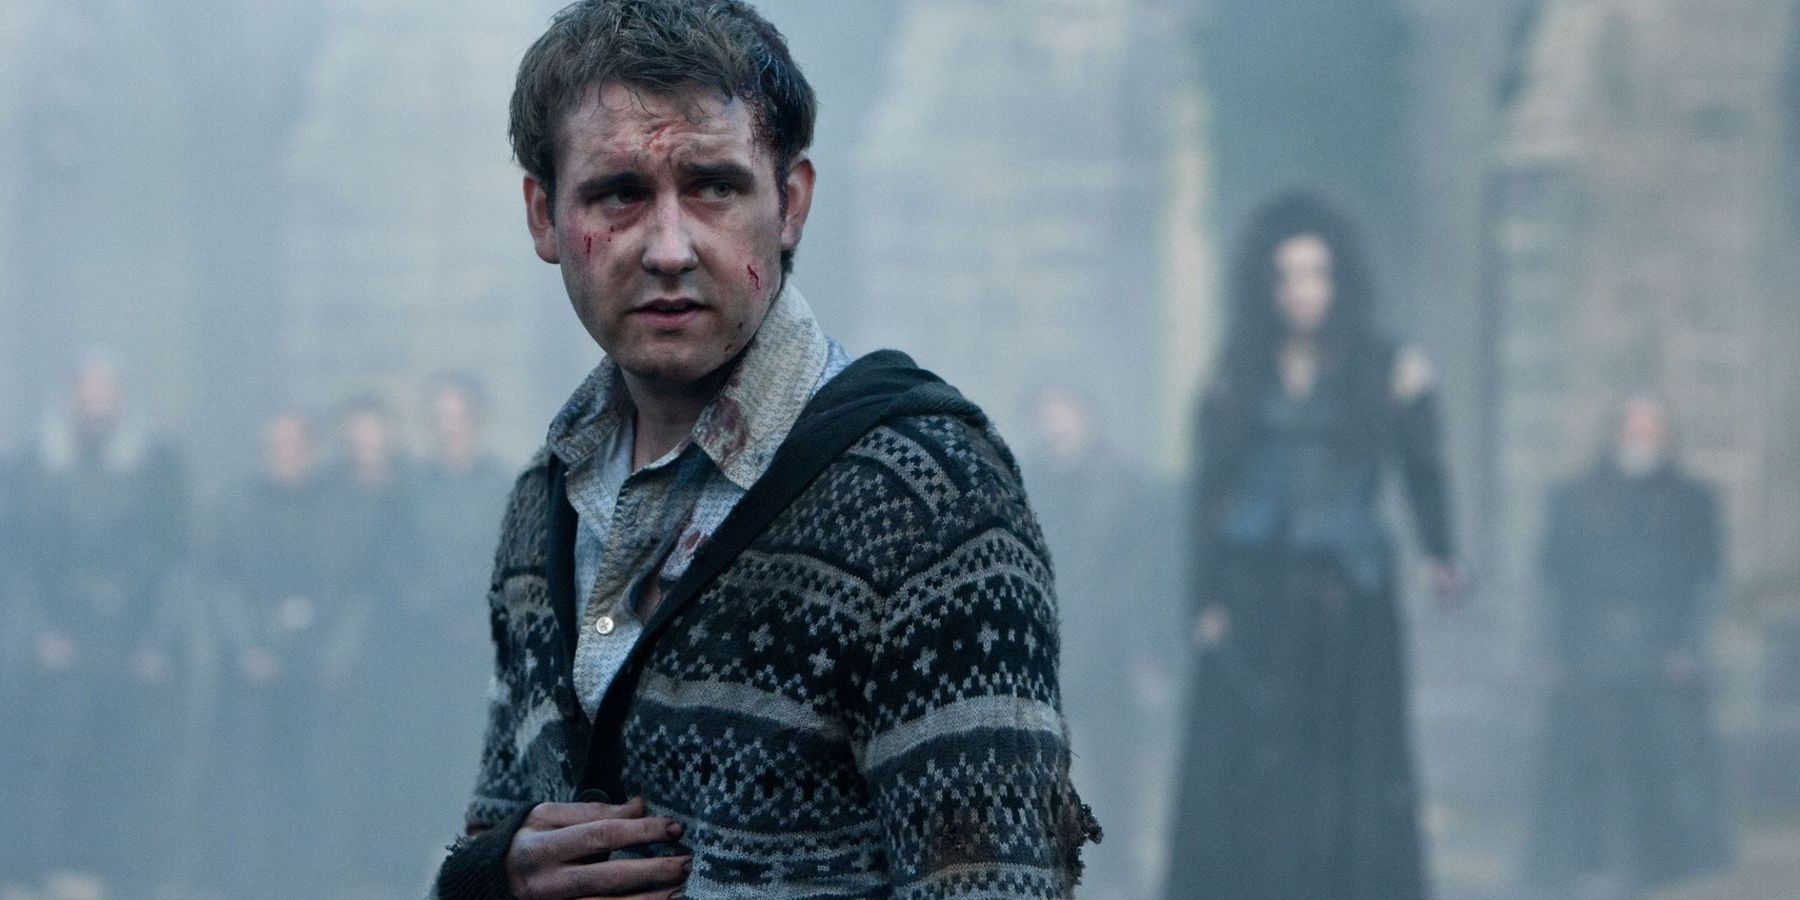 Neville Longbottom during the Battle of Hogwarts in Harry Potter and the Deathly Hallows Part 2.